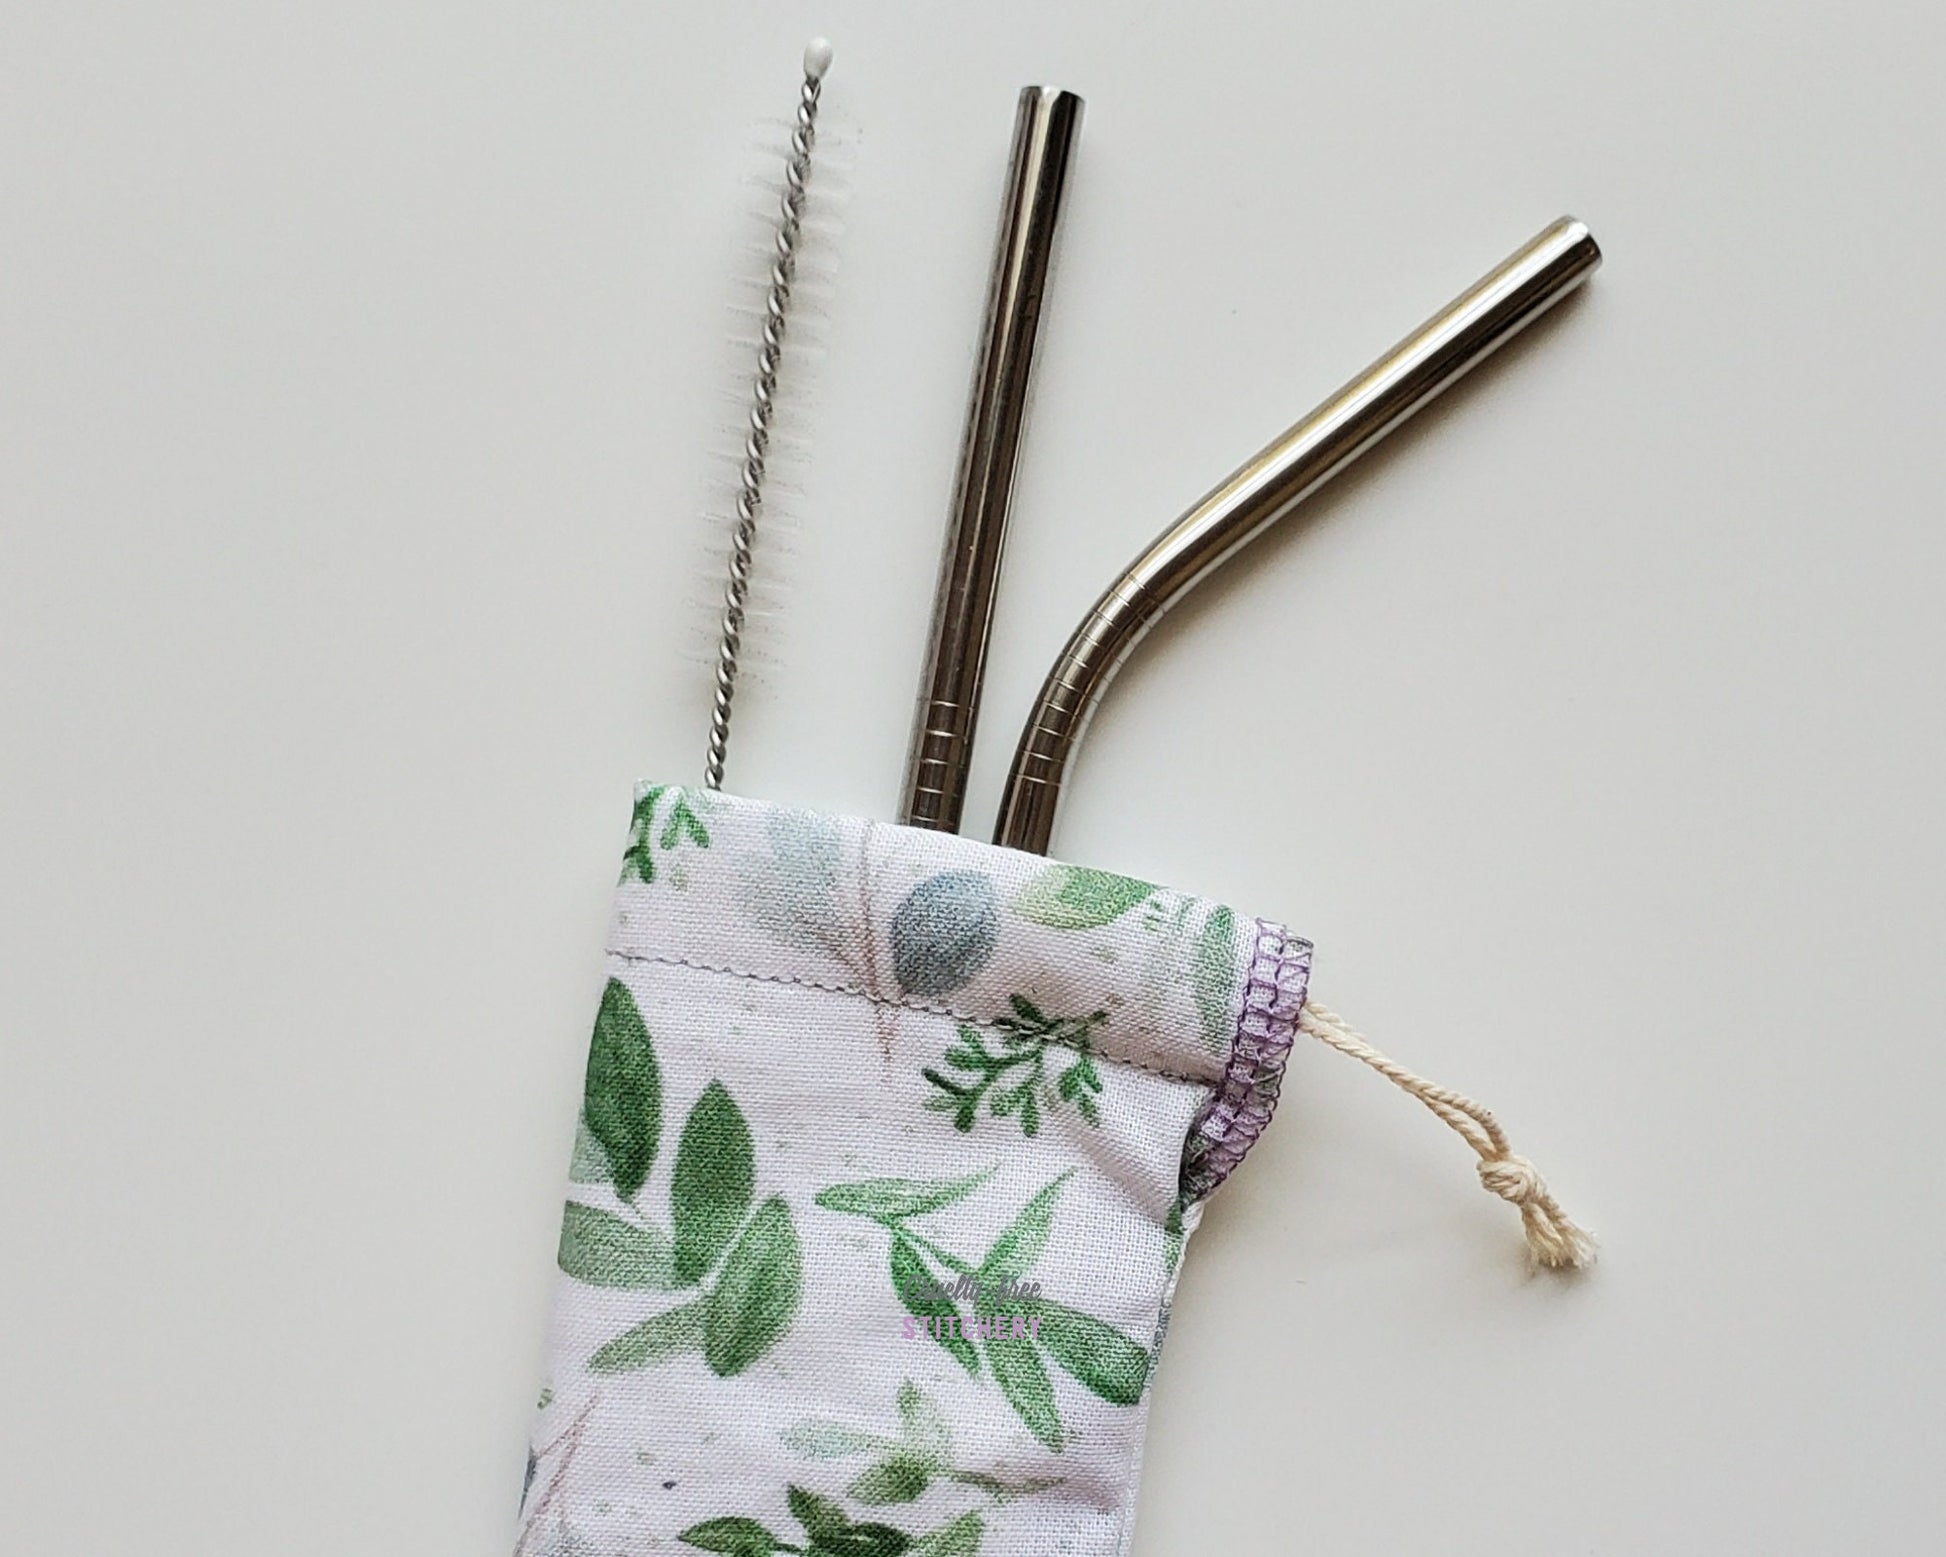 Reusable straw pouch with stainless steel straws sticking out the top. The fabric of the pouch is white with green eucalyptus vines and leaves printed on, and it has a drawstring closure.